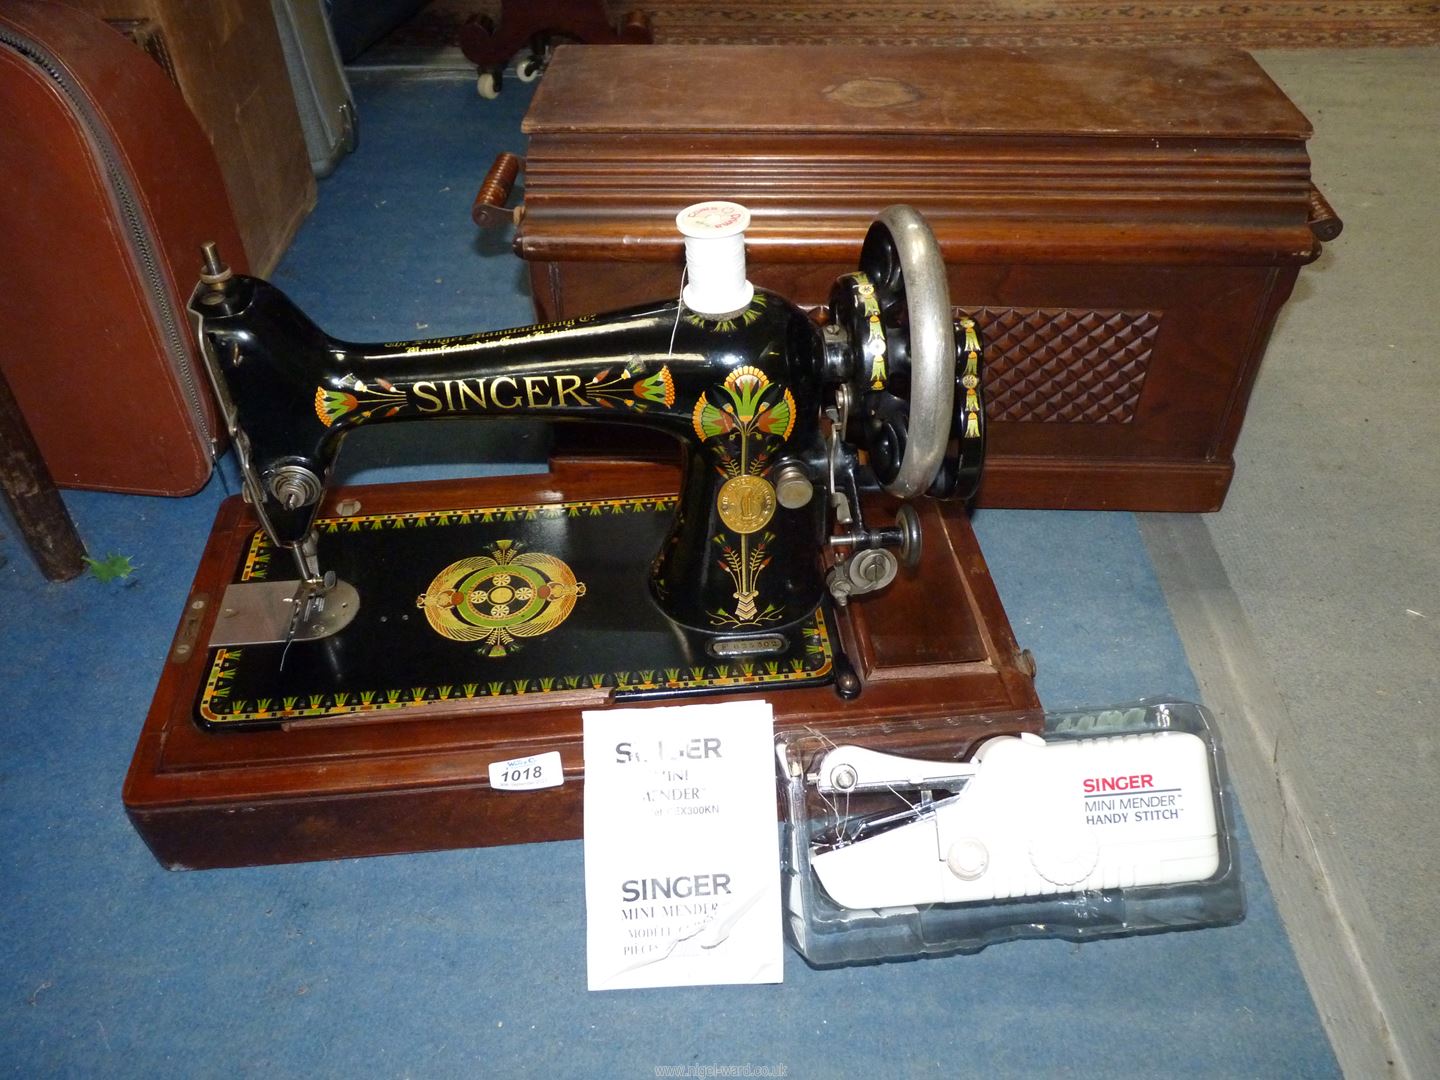 A Singer sewing Machine in wooden box, no. F625302, with key and a Singer Mini mender.